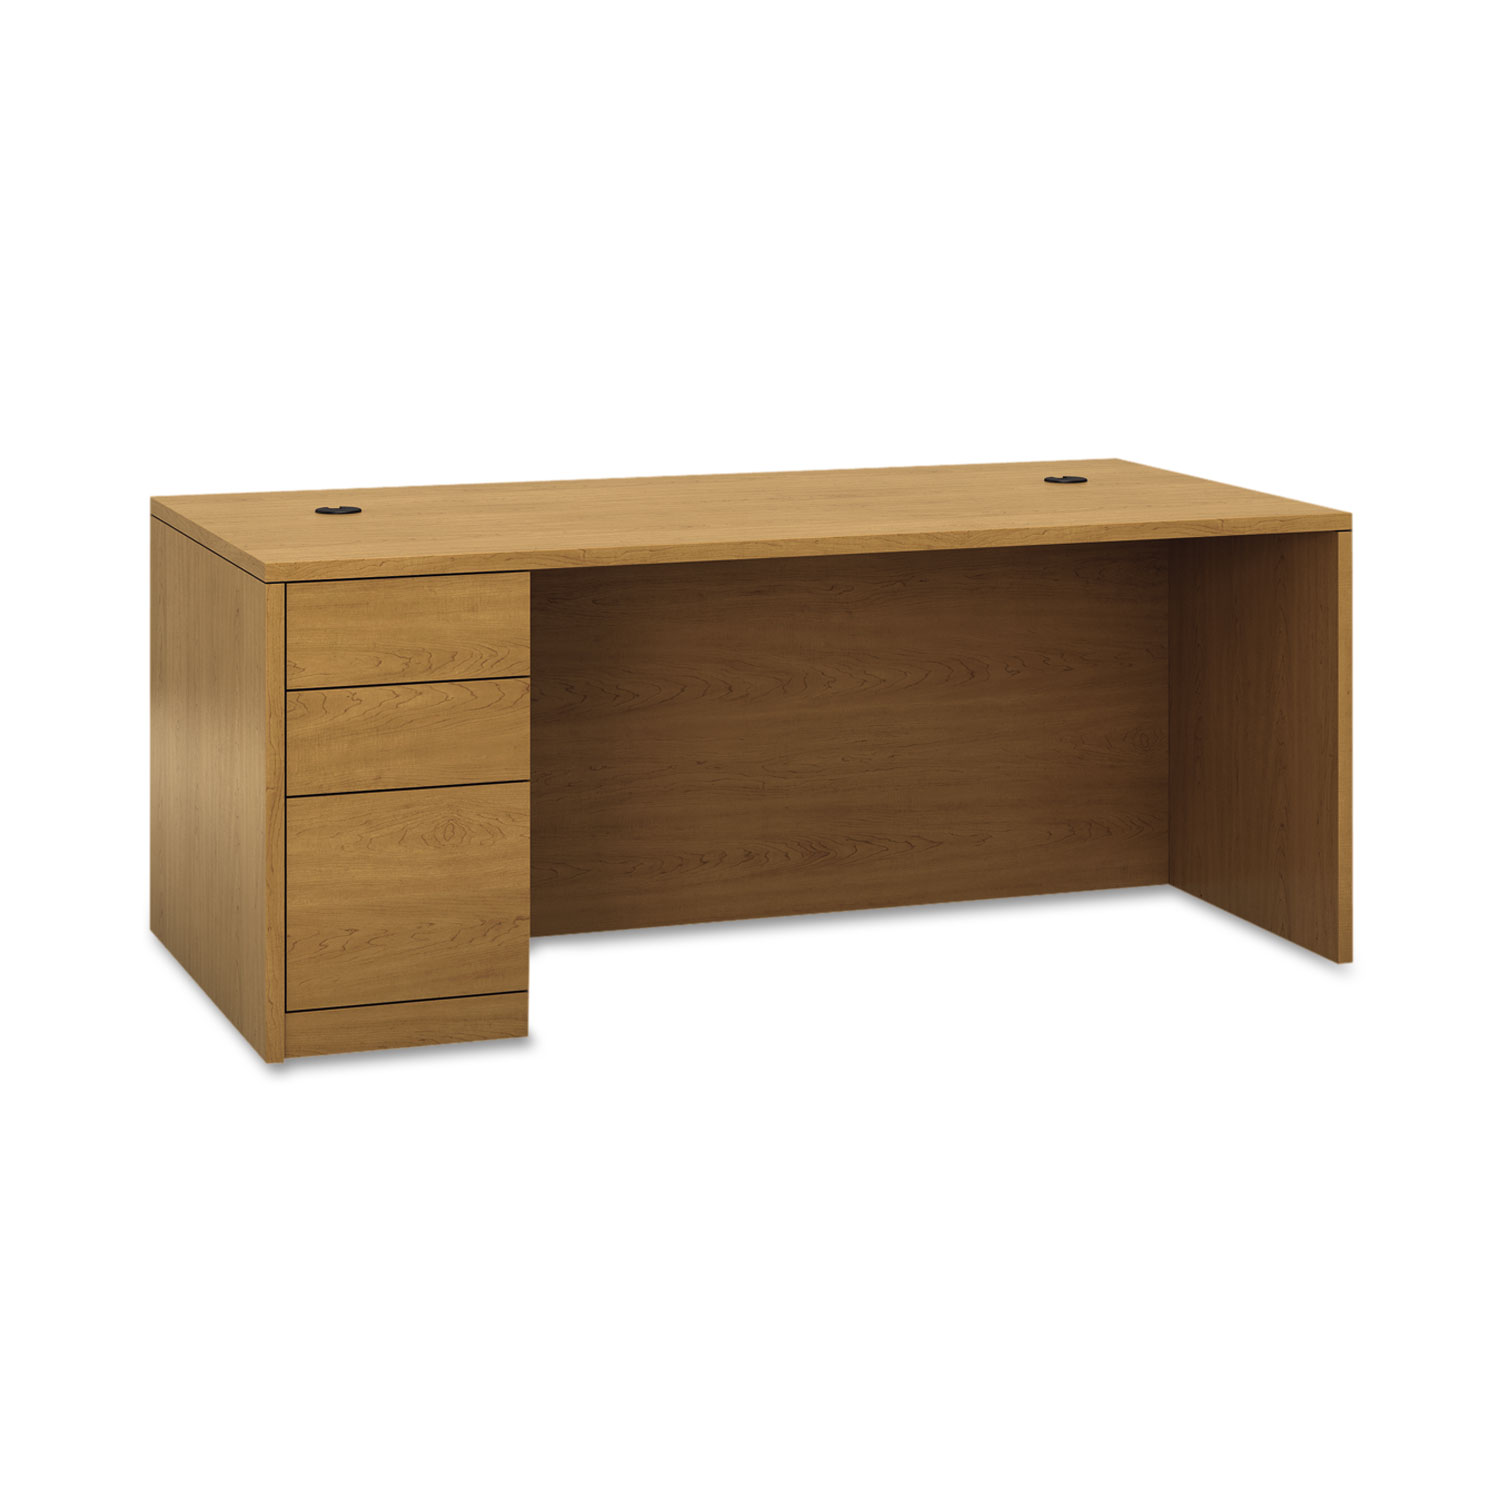 10500 Series L Single Ped Desk, Left Full-Height Ped, 72 x 36, Natural Maple